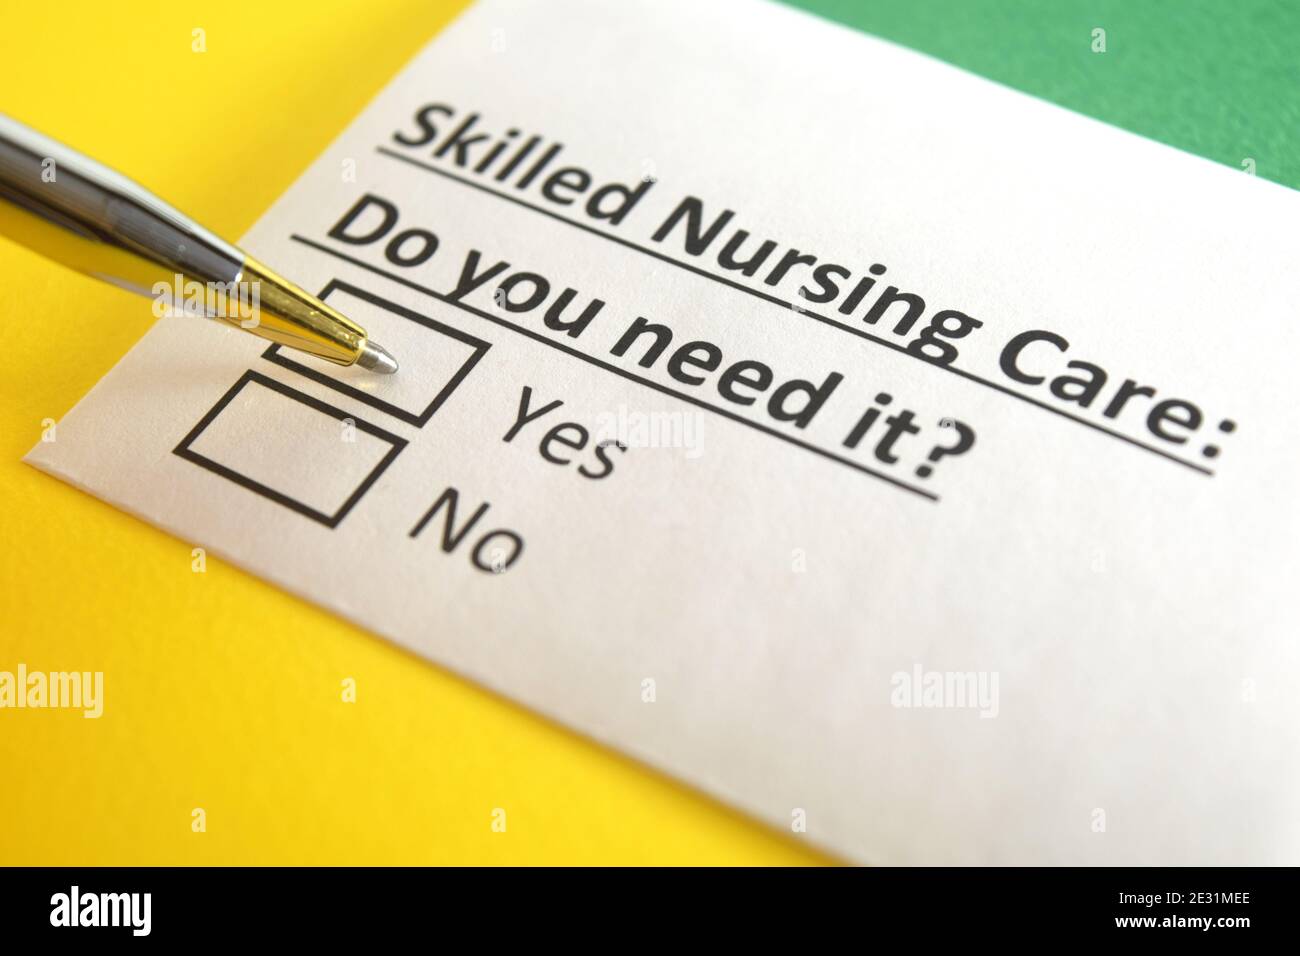 One person is answering question about skilled nursing care. Stock Photo